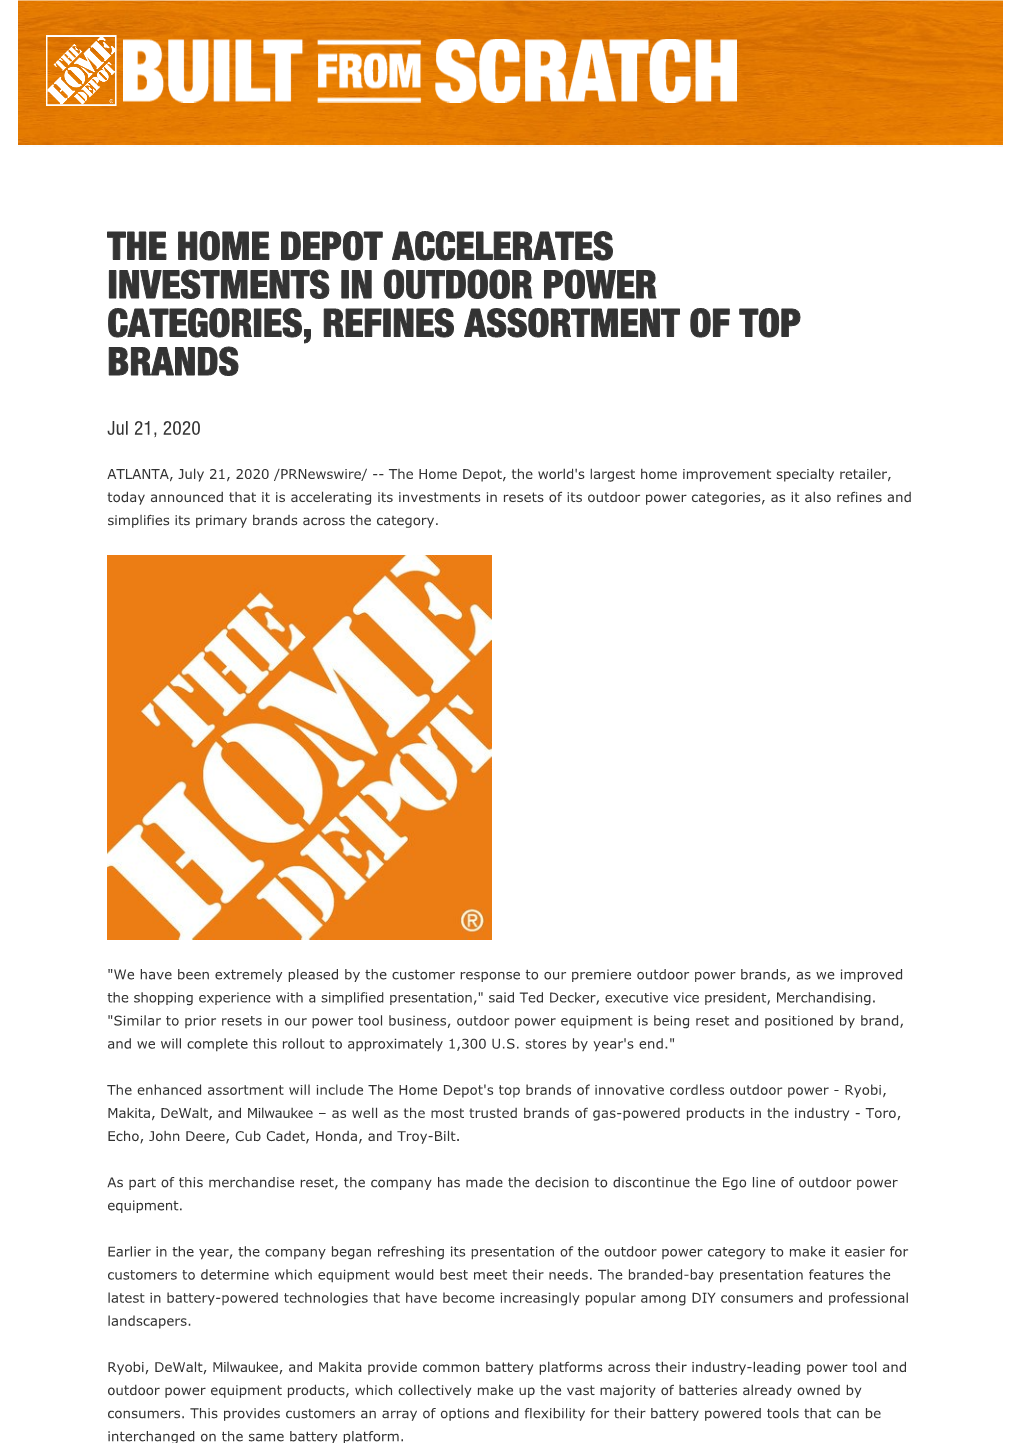 The Home Depot Accelerates Investments in Outdoor Power Categories, Refines Assortment of Top Brands